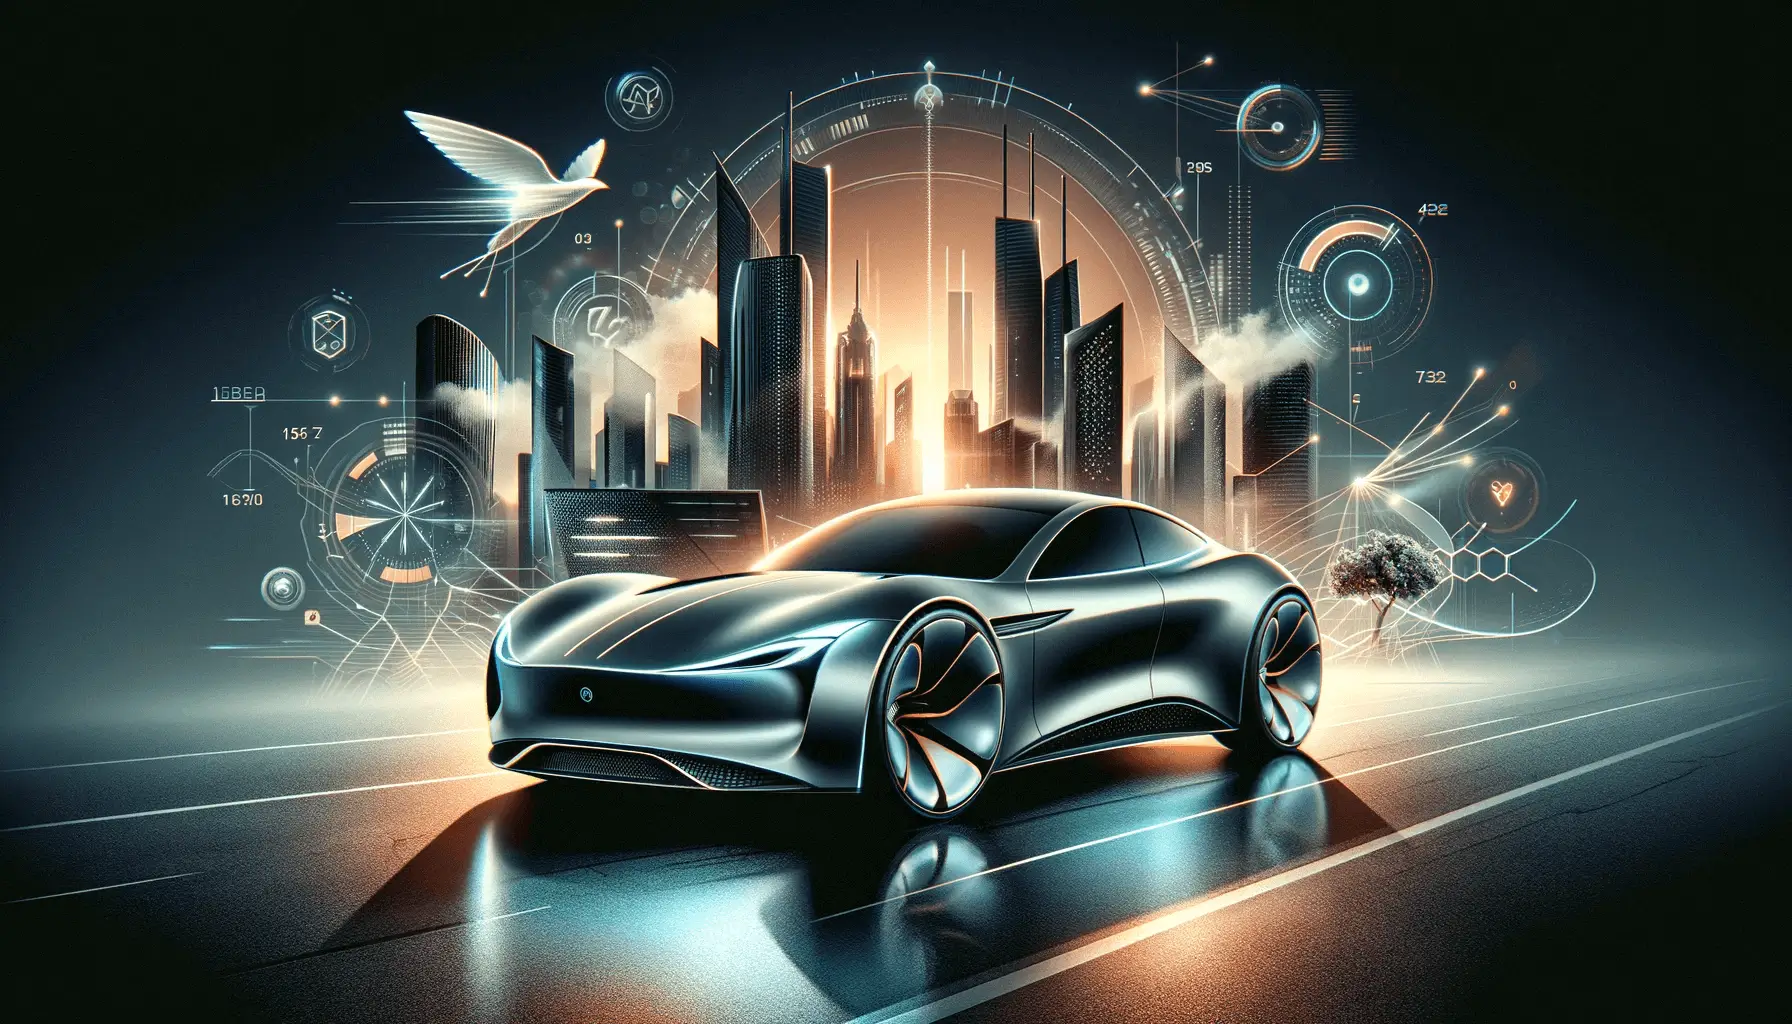 A sleek, avant-garde electric car representing Karma Automotive's innovative future, set against a backdrop of technological advancement and sustainability, symbolizing the brand's commitment to luxury electric mobility.